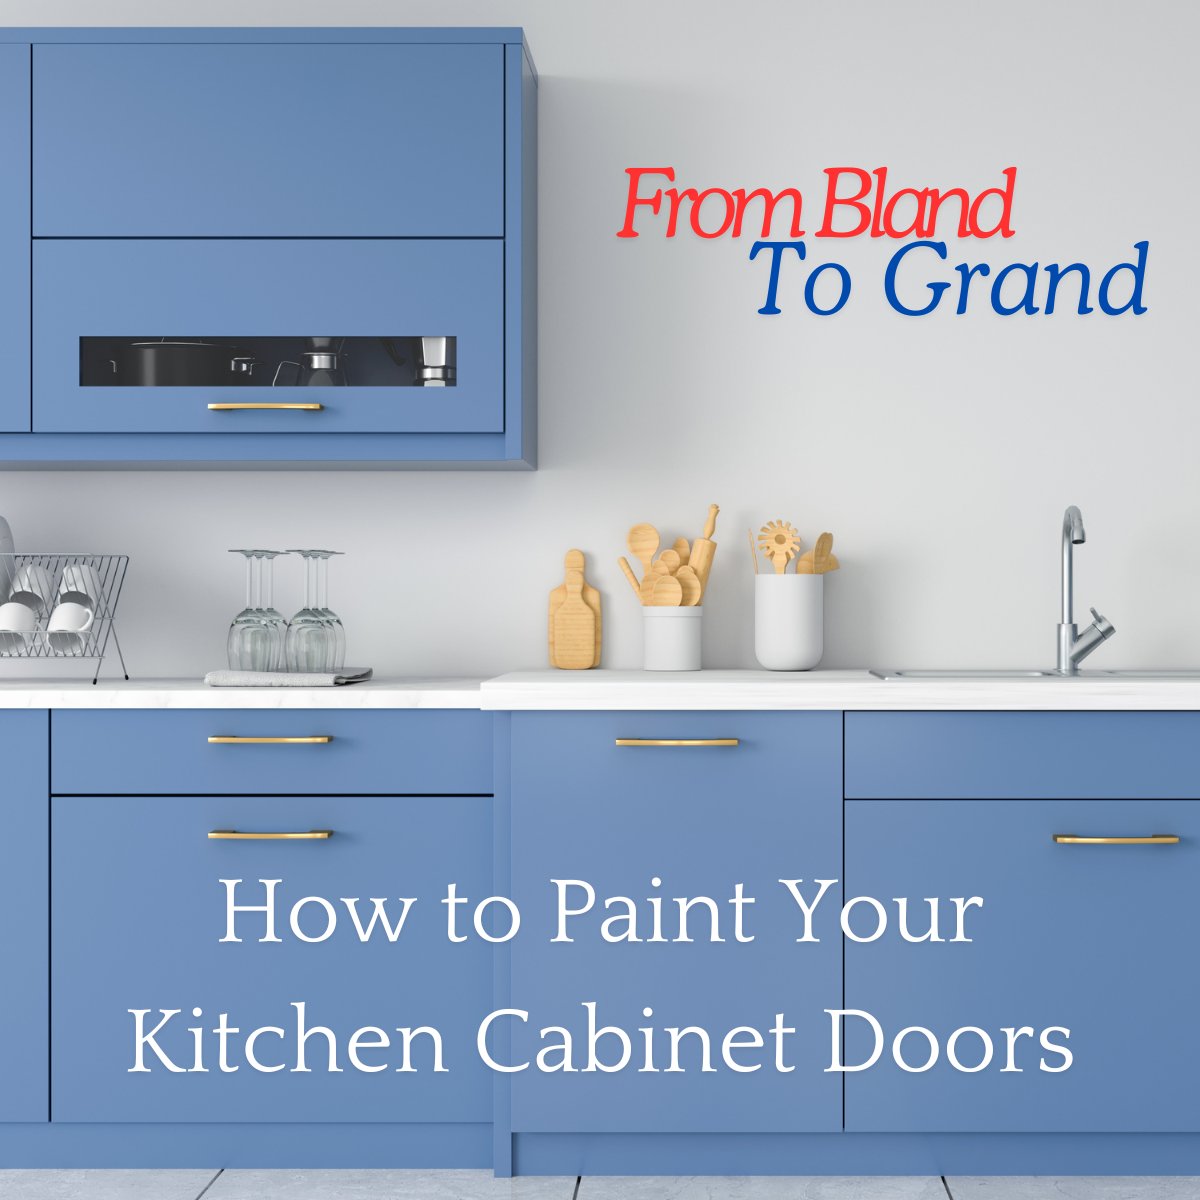 Painting your kitchen cabinet doors can be a game-changer for your home's aesthetics,! Read our guide today to learn how to paint your kitchen cupboards, taking them from bland to grand! 🧐👉 palatinepaints.co.uk/from-bland-to-…